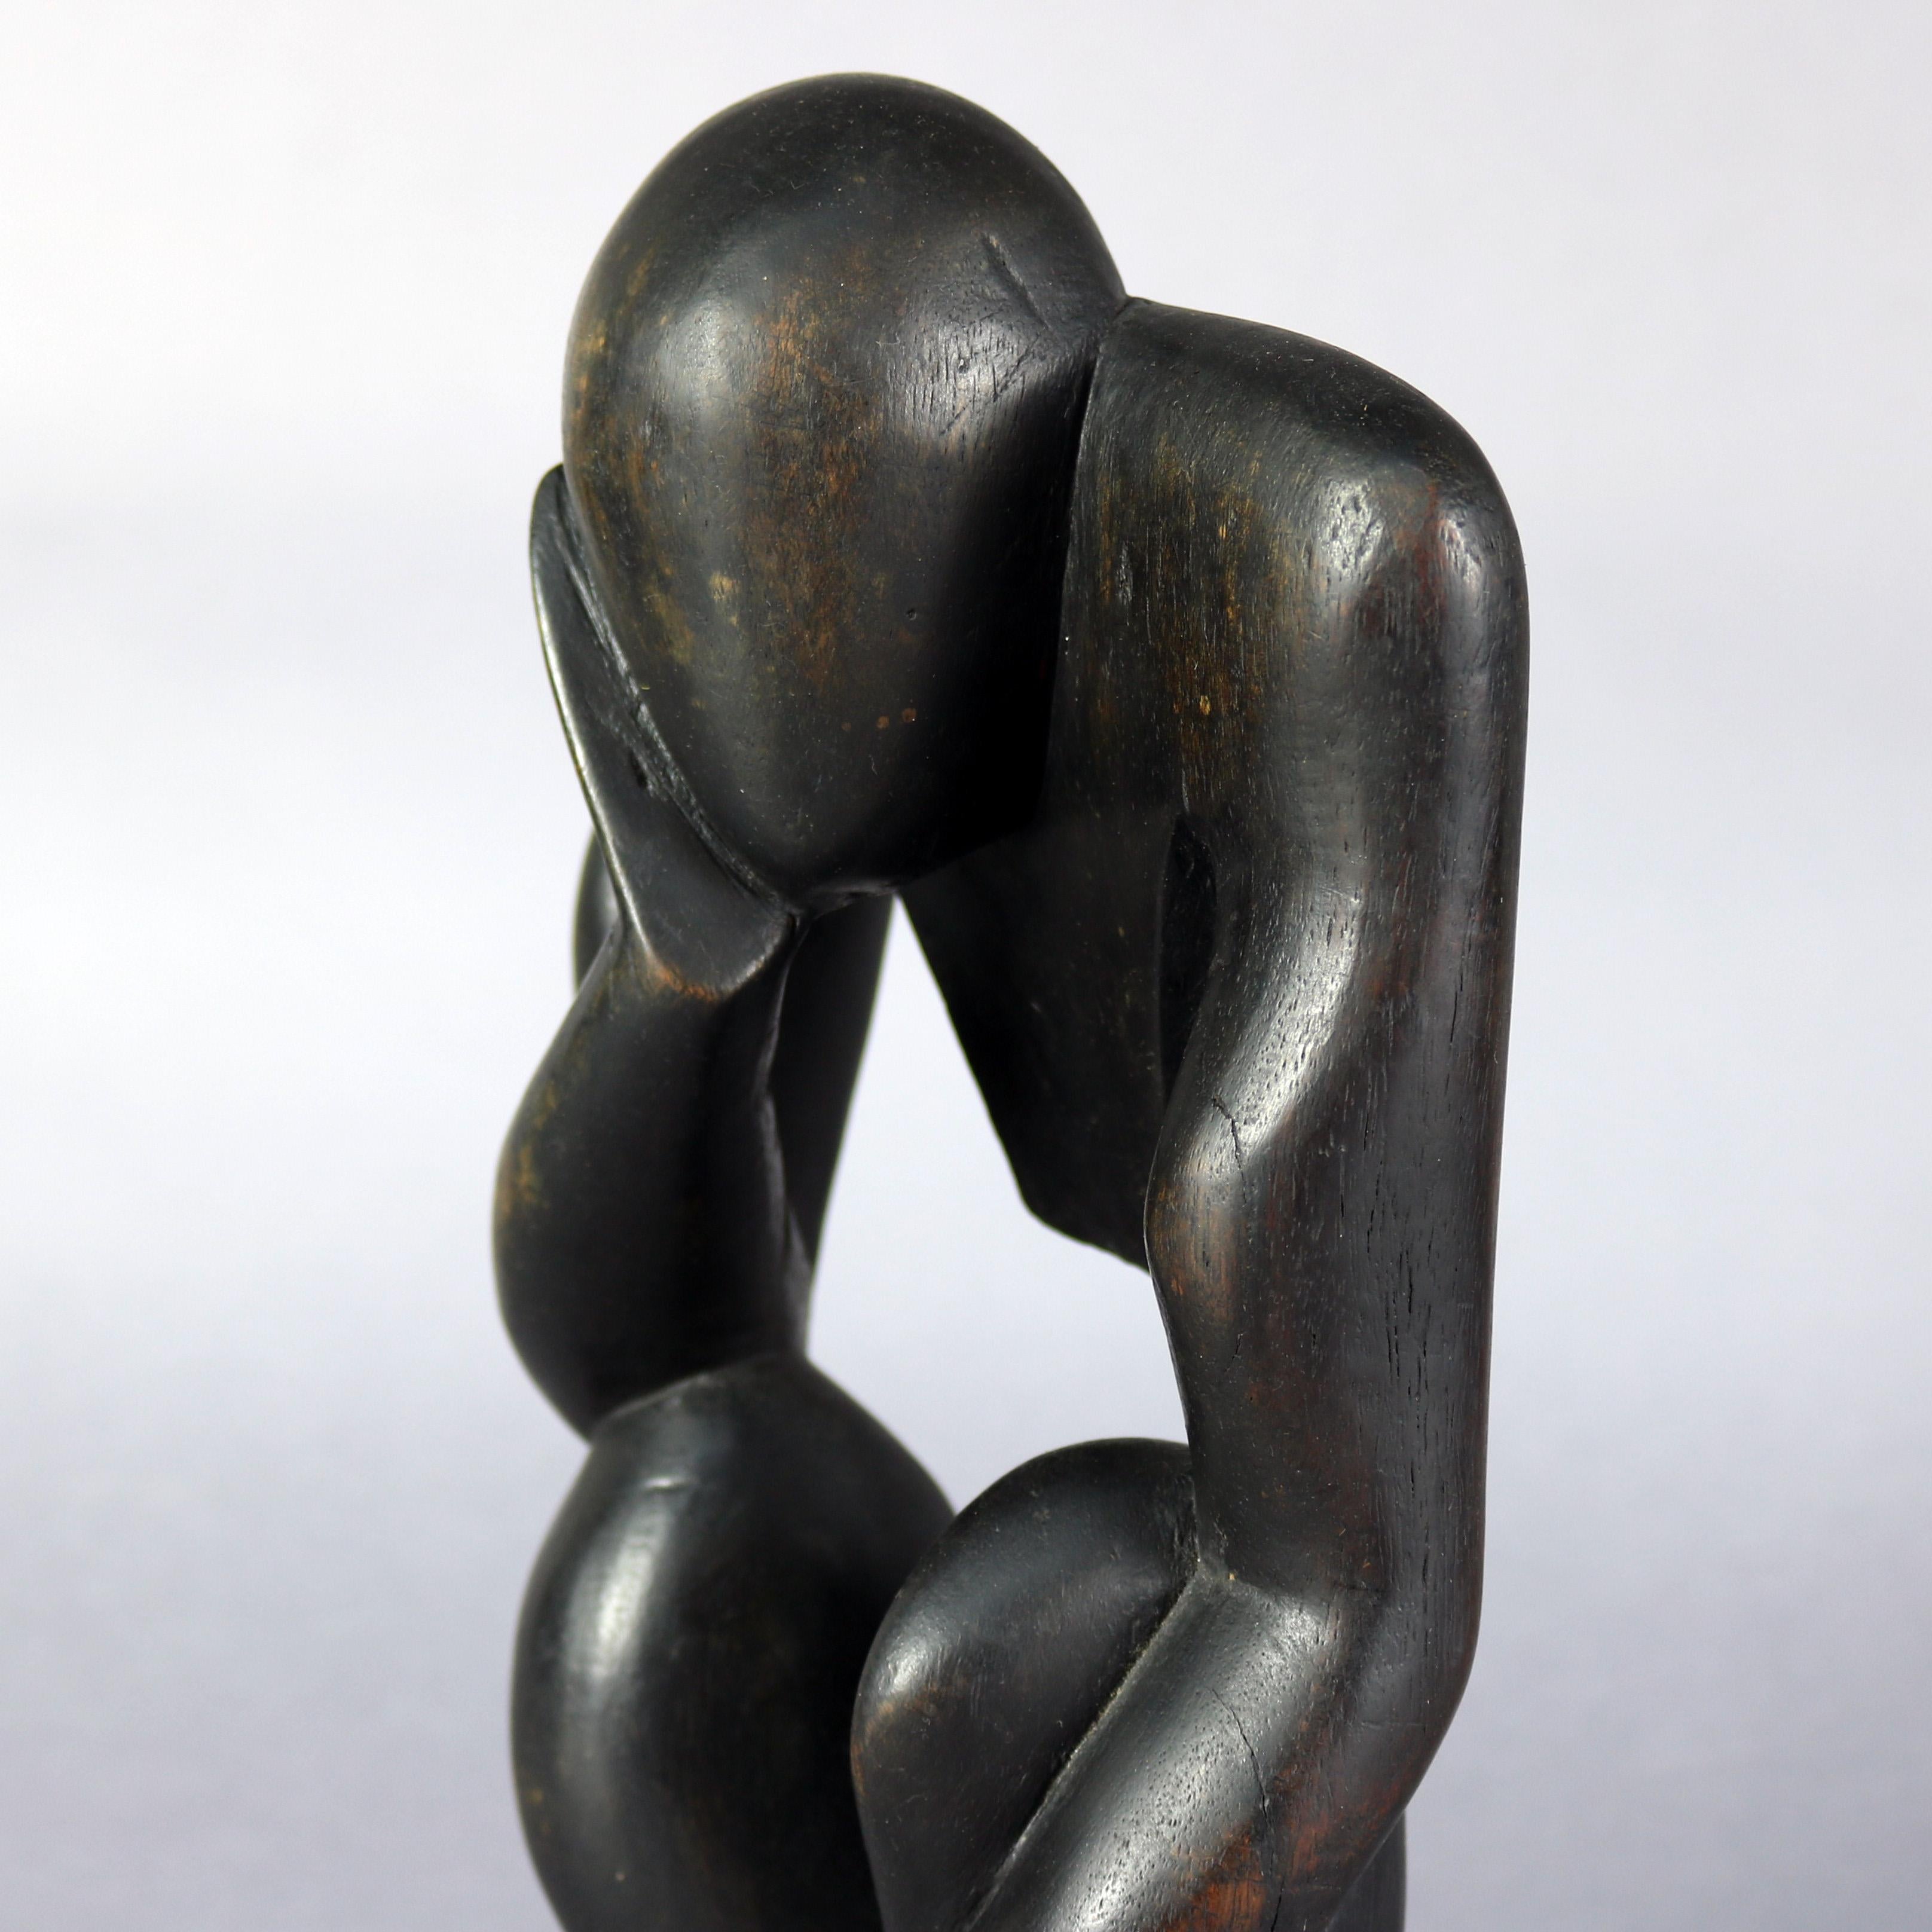 American Mid-Century Modern Ebonized Carved Wood Abstract Sculpture, the Thinker